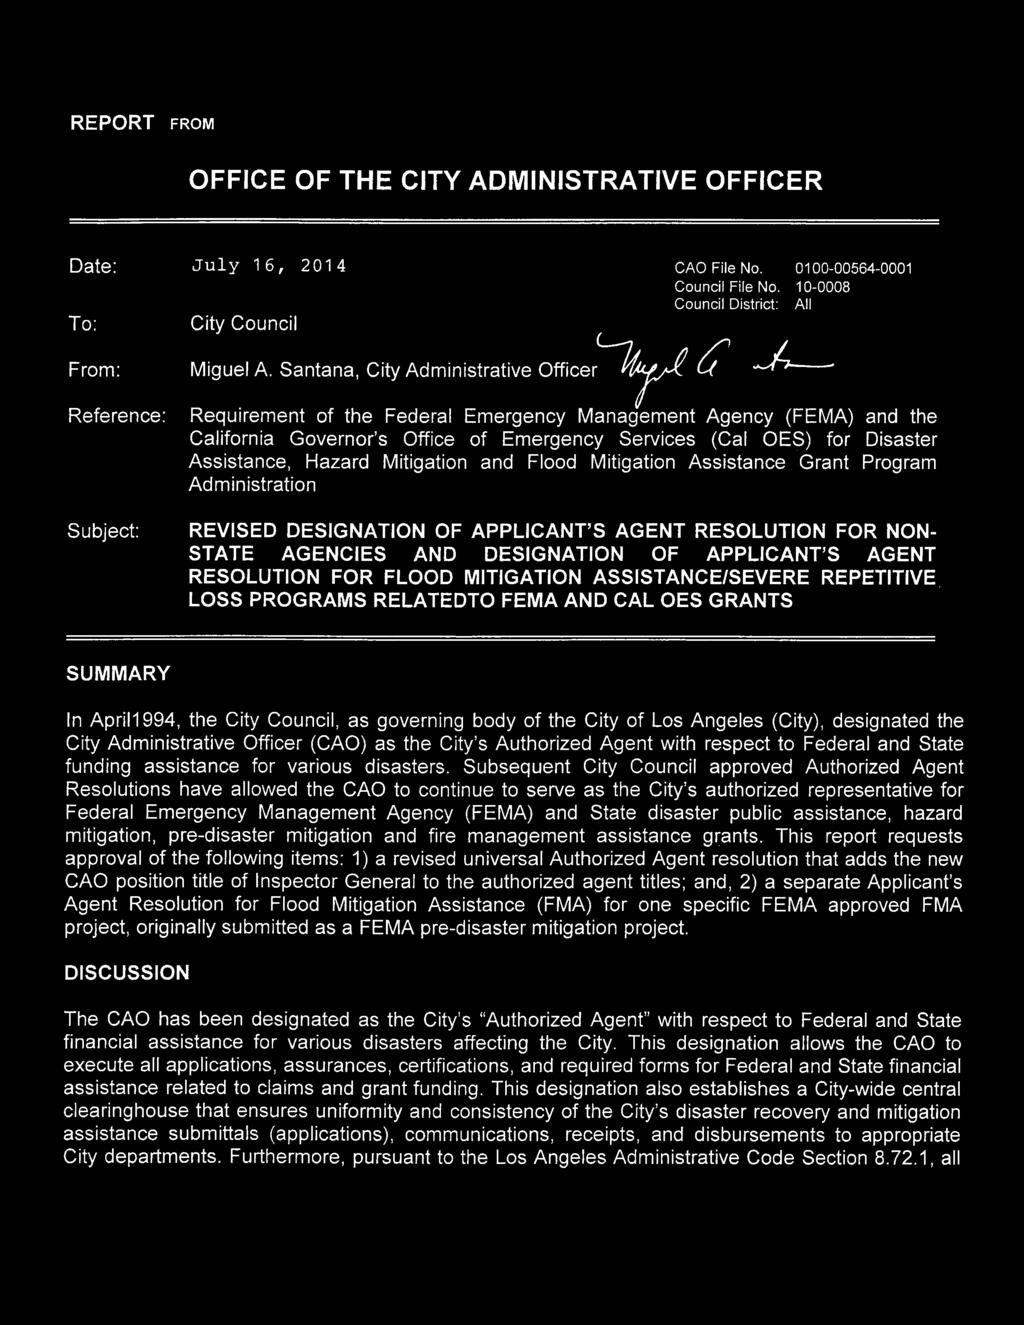 Santana, City Administrative Officer Requirement of the Federal Emergency Management Agency (FEMA) and the California Governor's Office of Emergency Services (Cal OES) for Disaster Assistance, Hazard